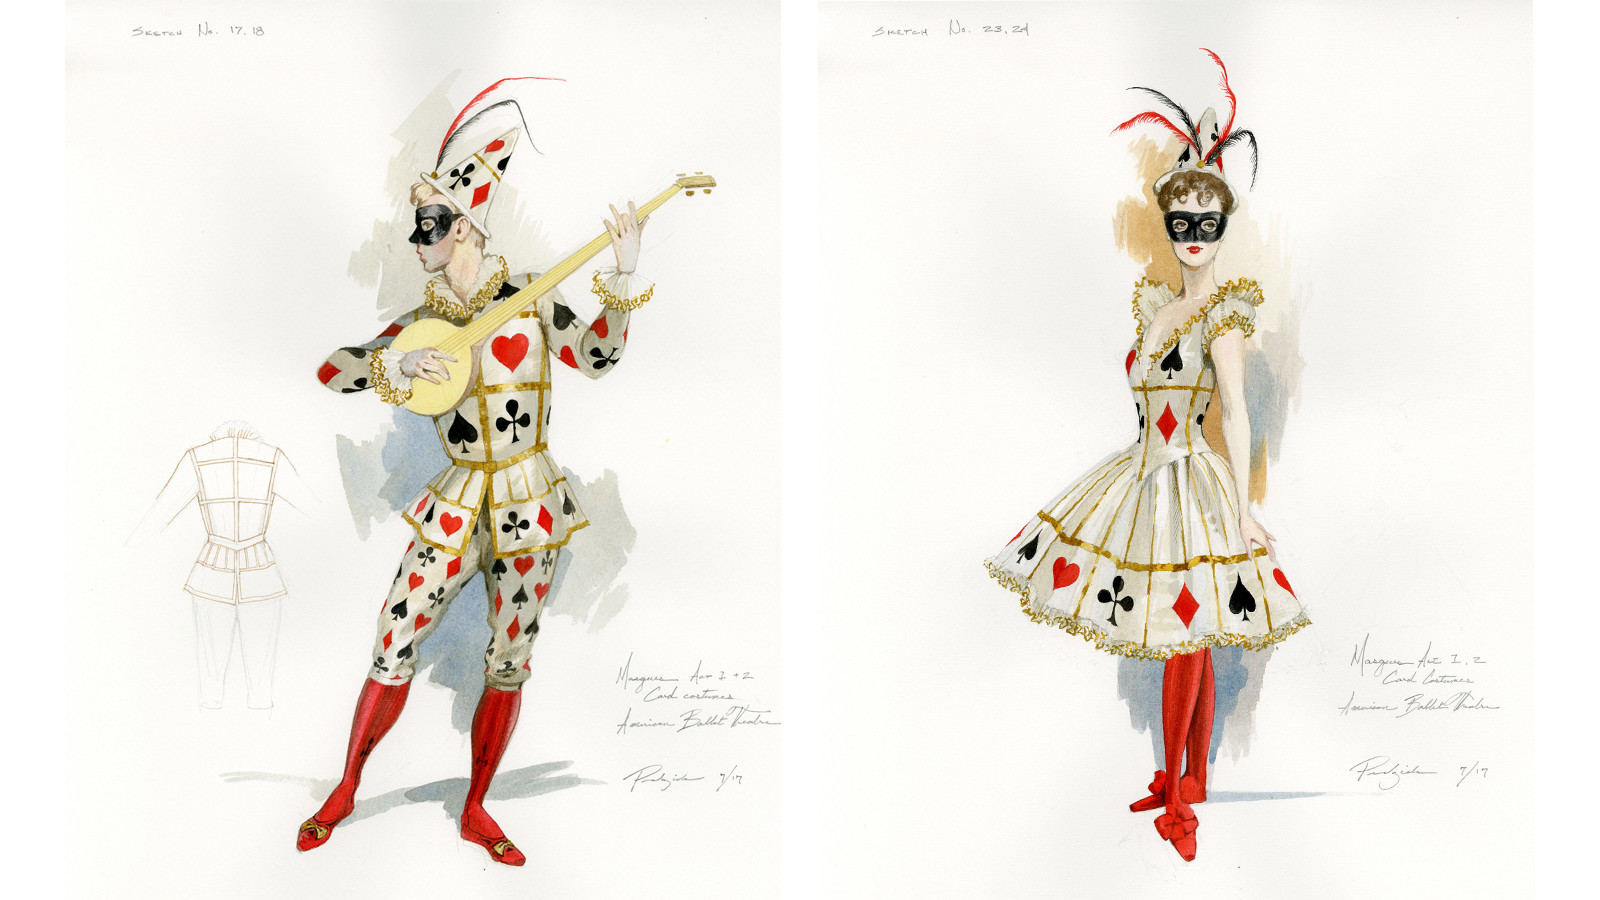 Robert Perdziola's sketches for the Card Man and Card Lady in American Ballet Theatre's 